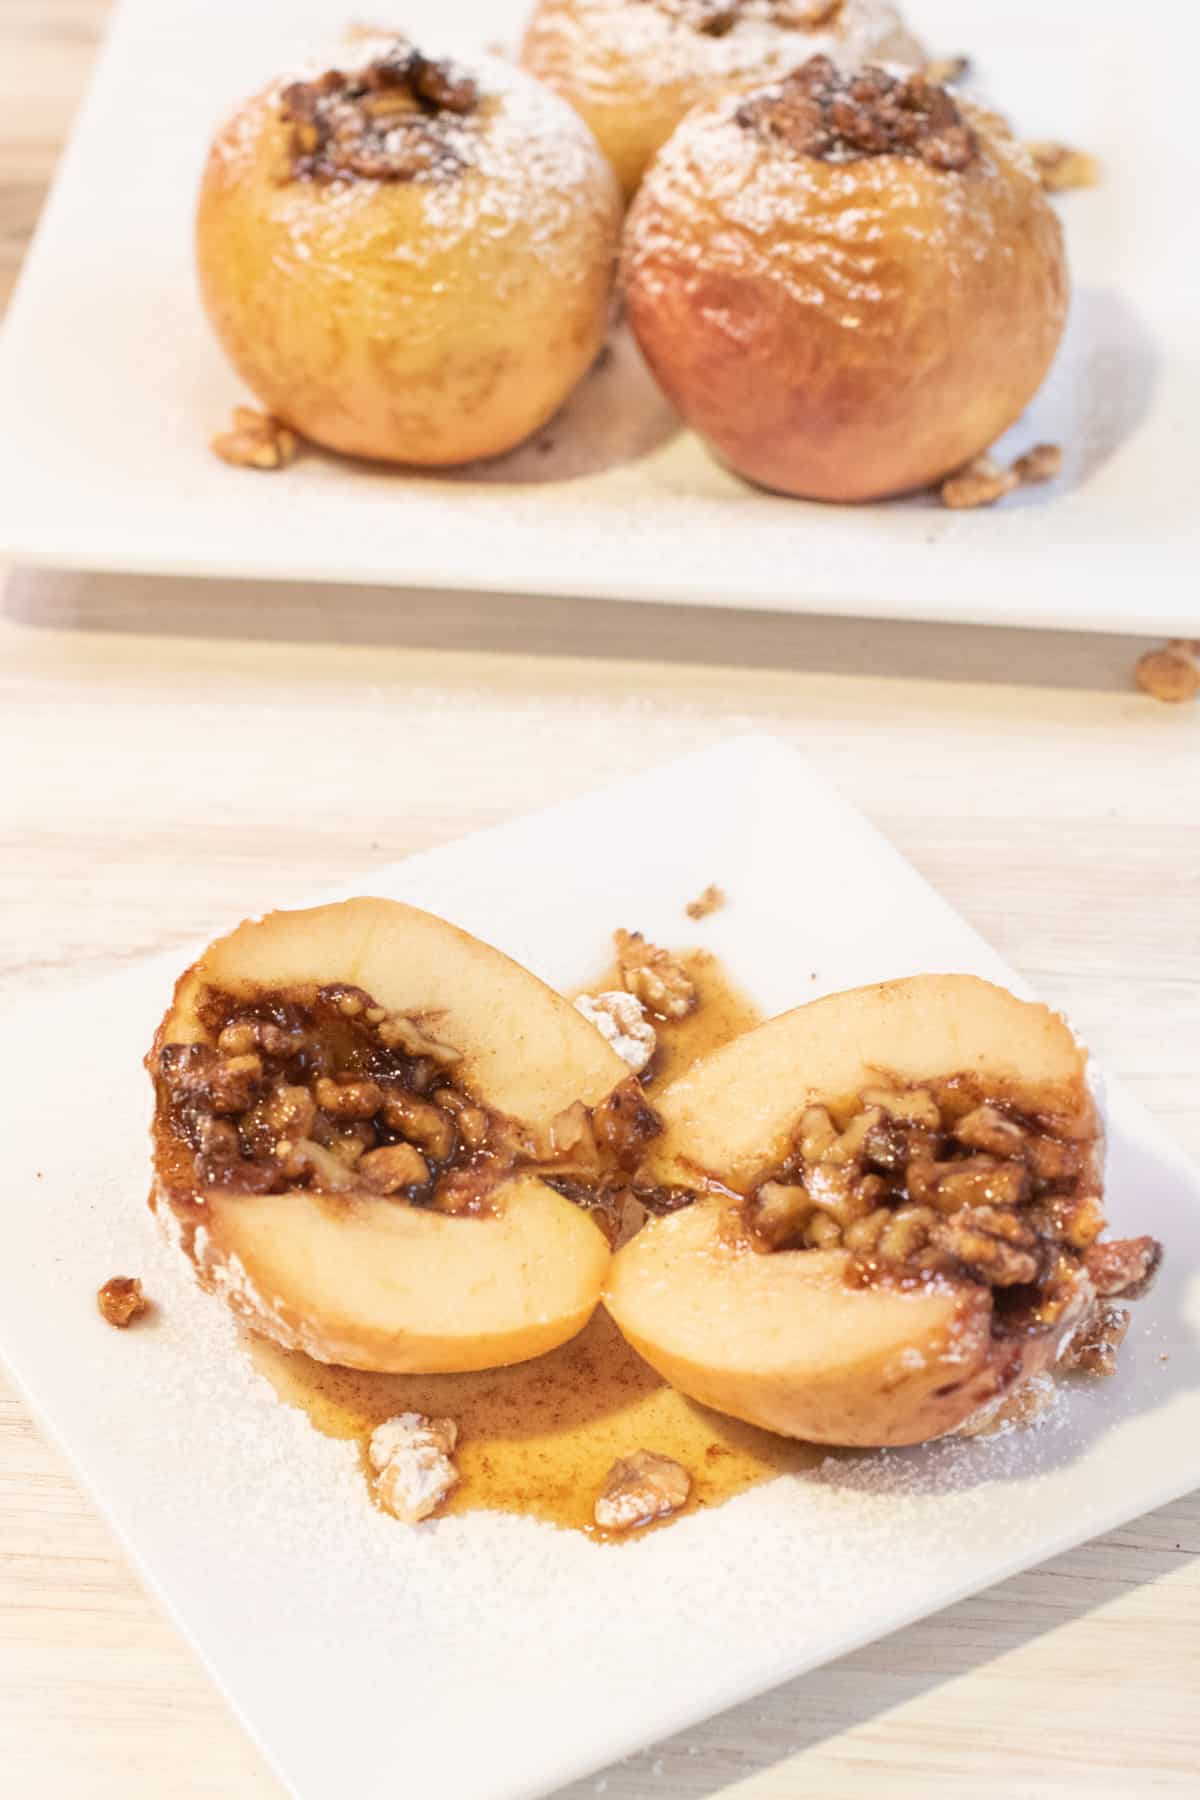 a halved baked apple with walnuts inside on a plate.